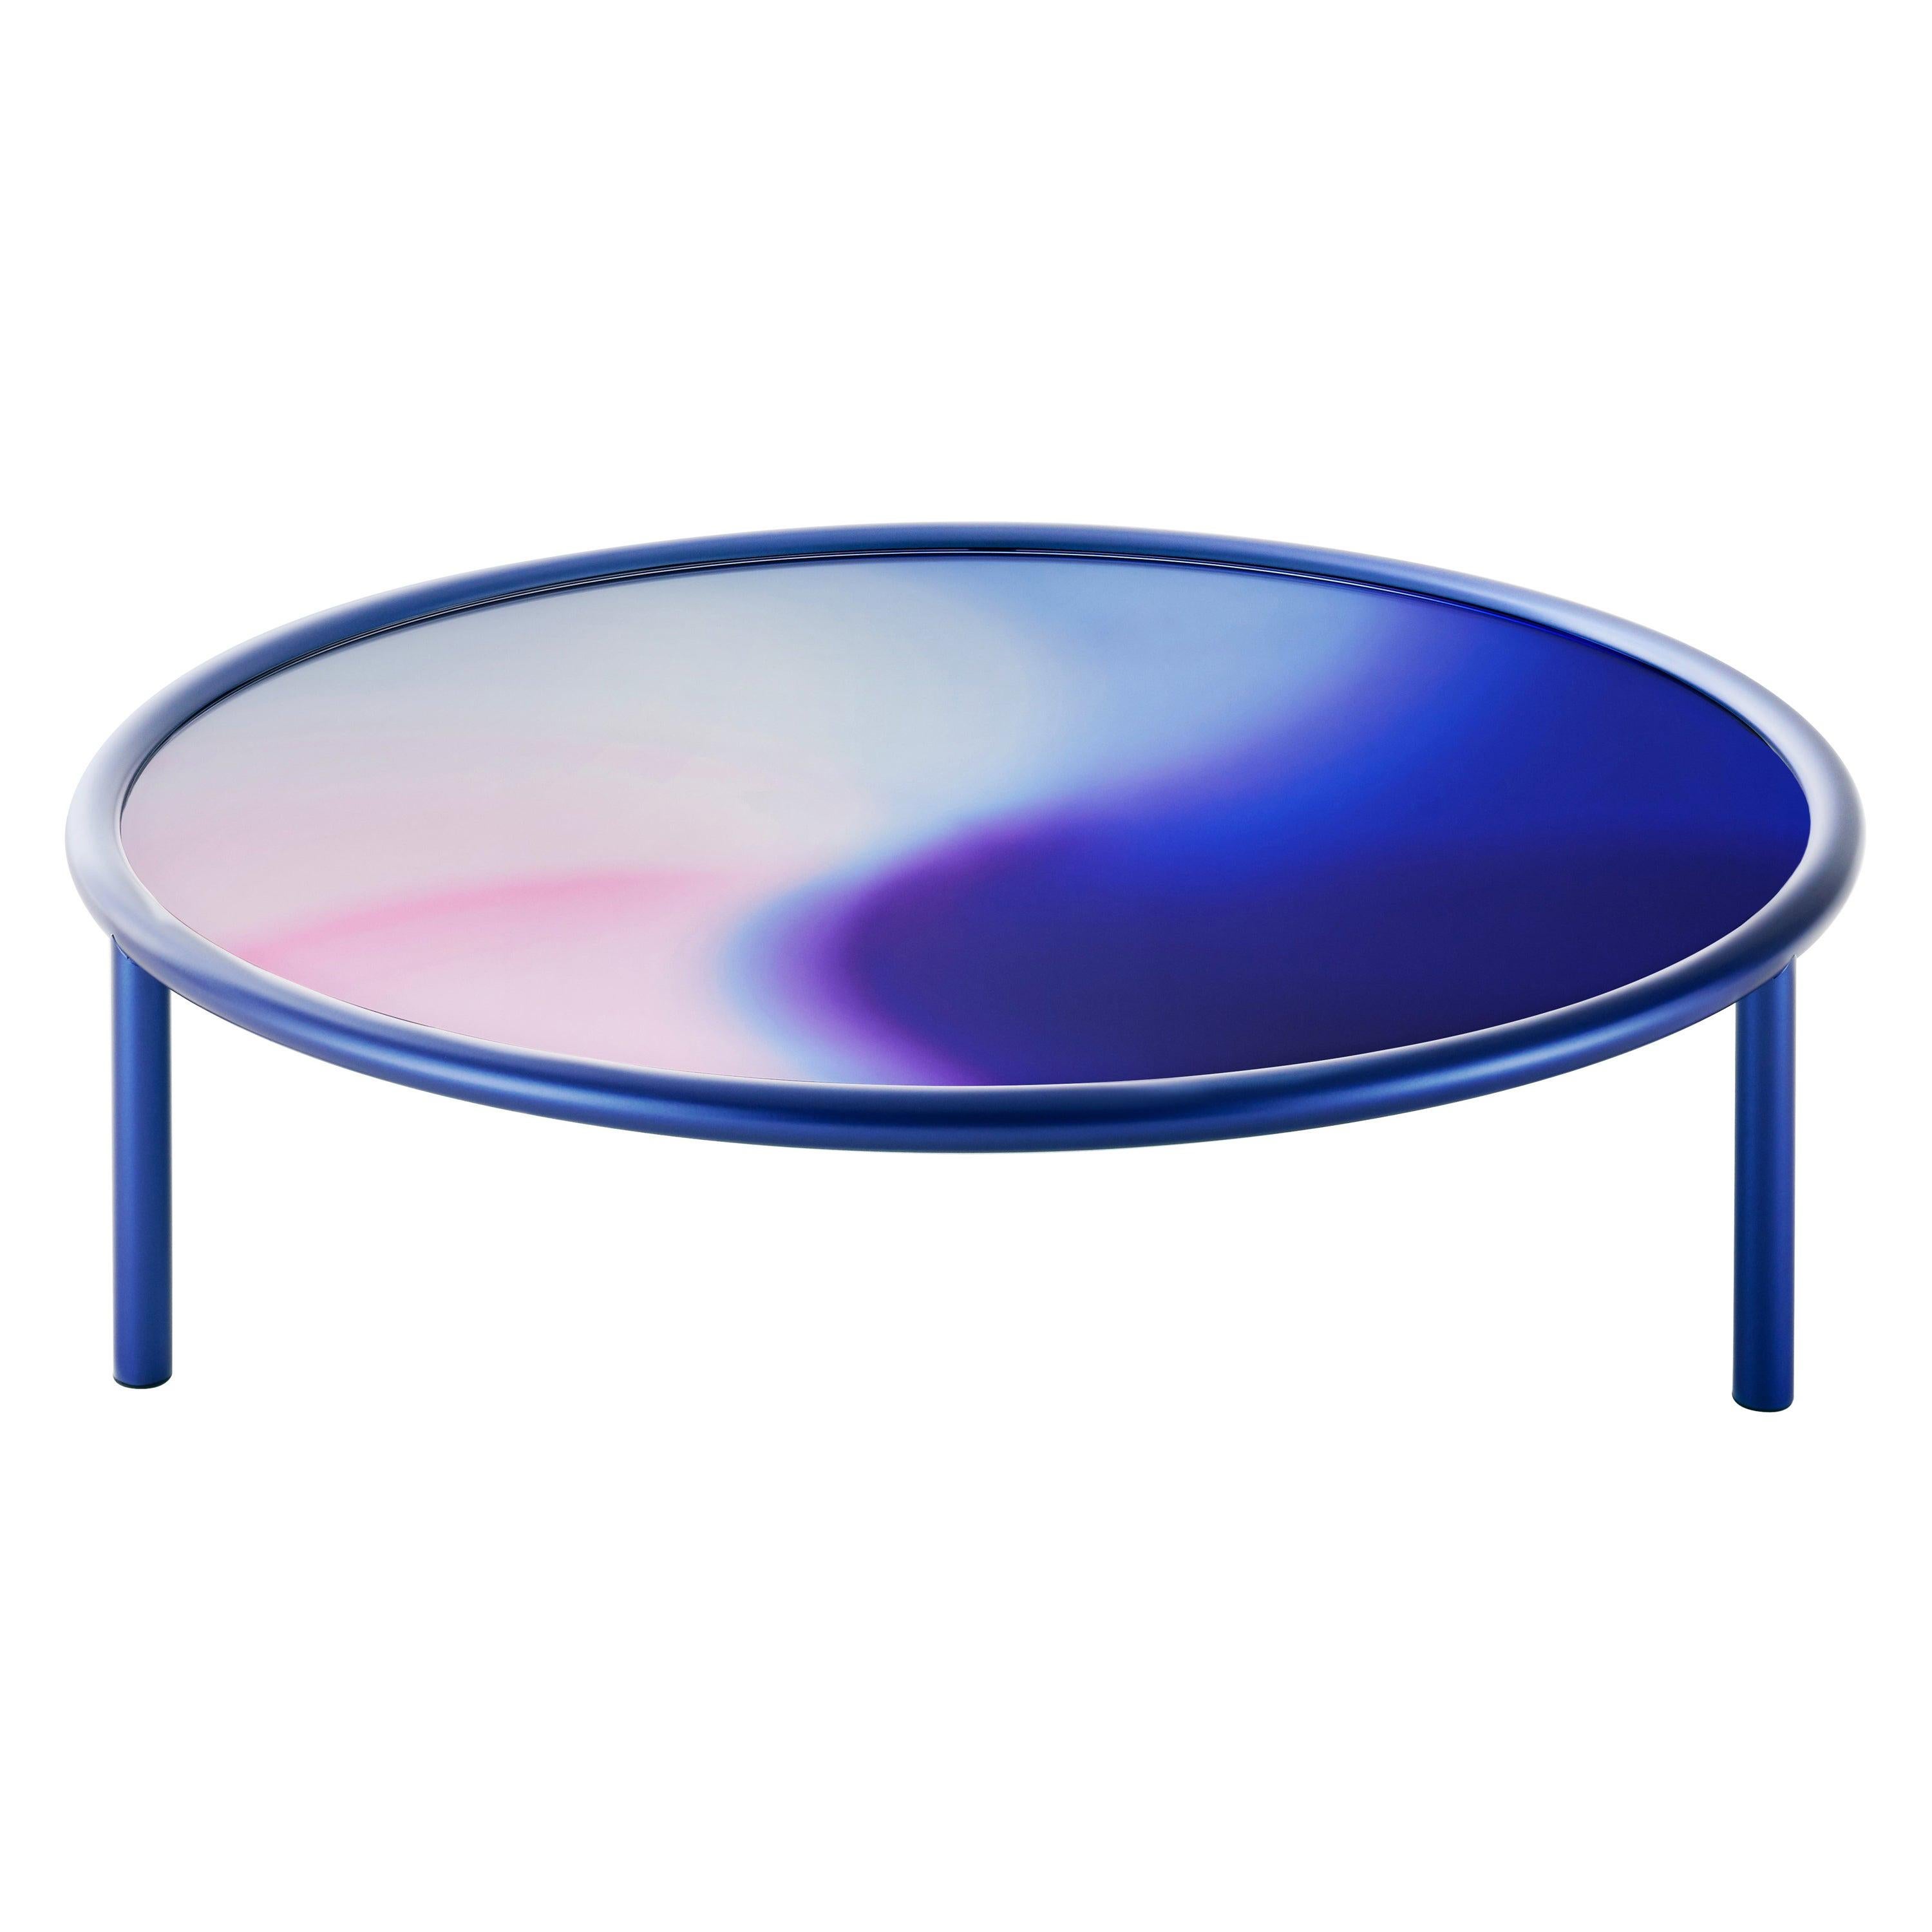 L.A. SUNSET Midnight Blue Table, by Patricia Urquiola, Glas Italia IN STOCK For Sale